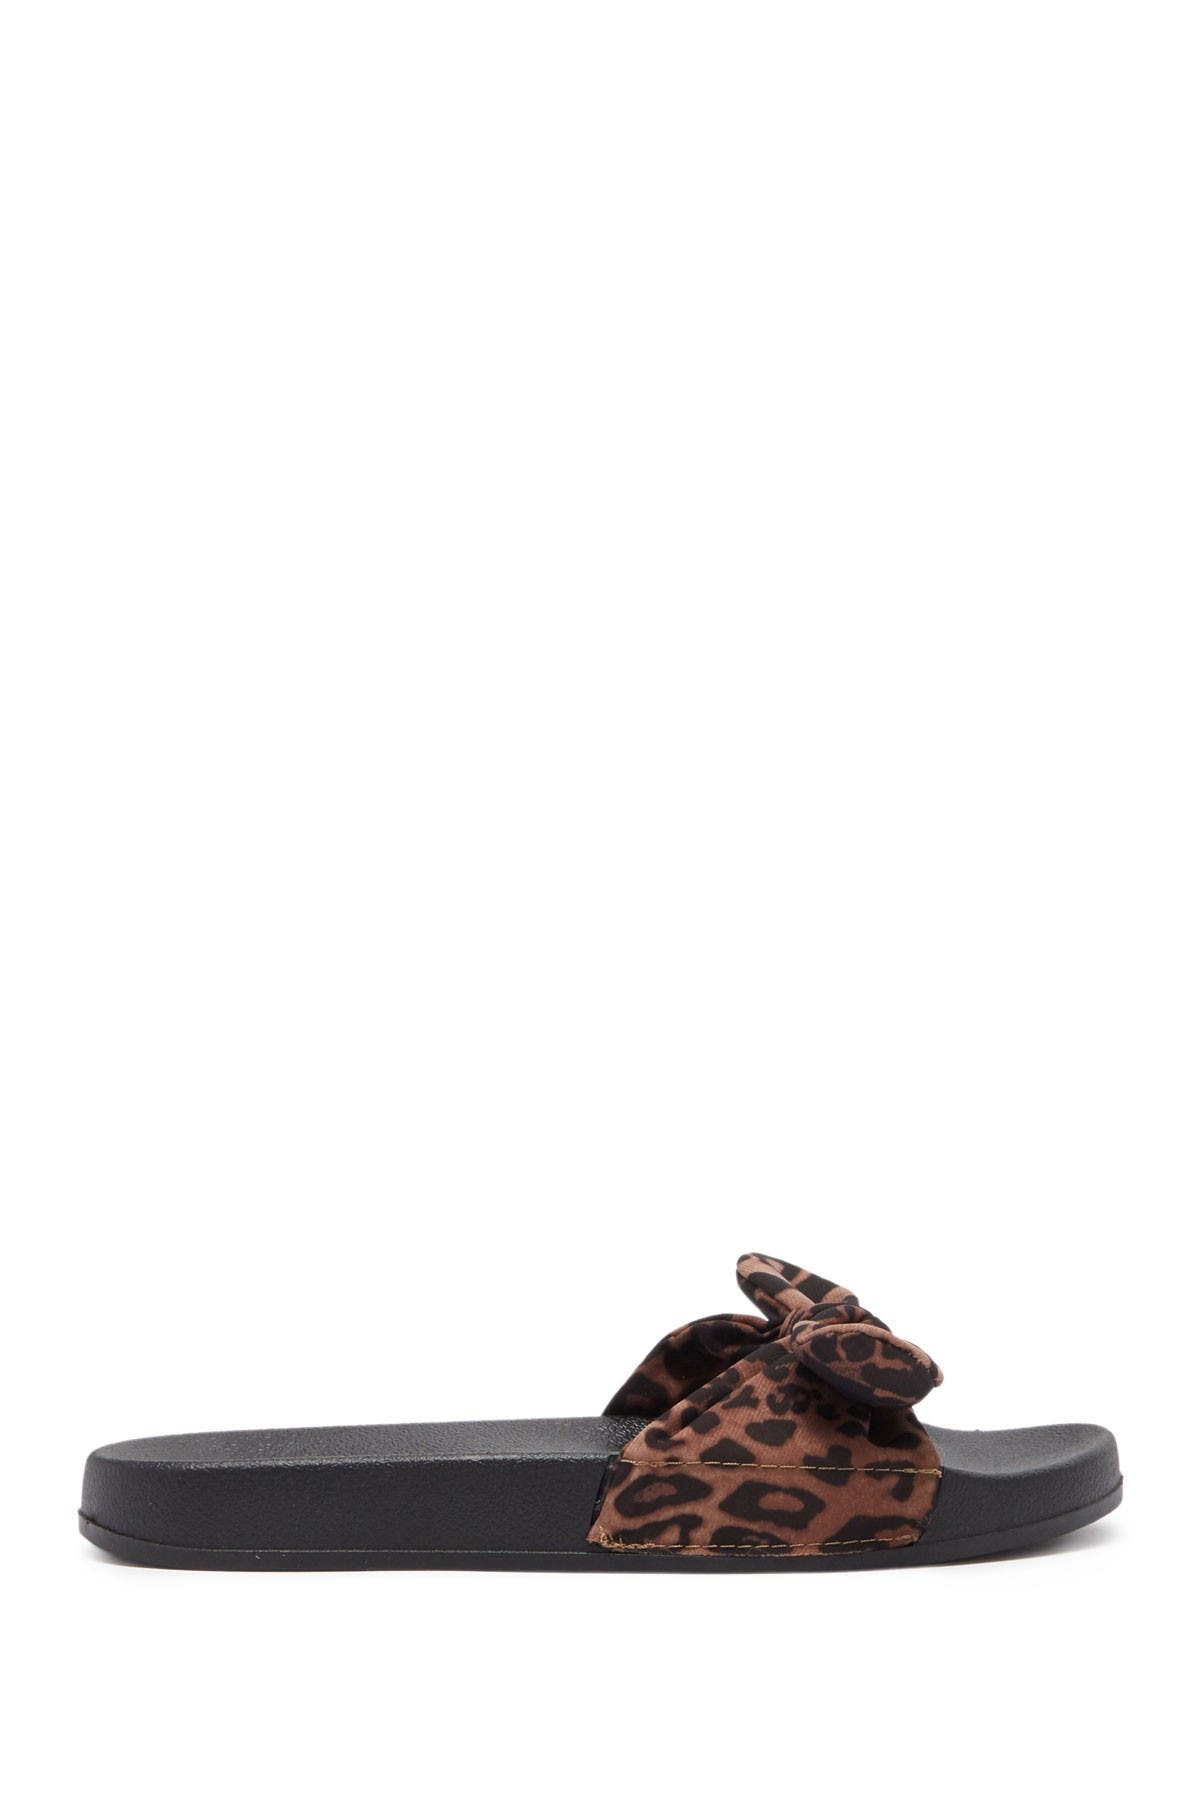 14th & Union Printed Bow Sandal In Leopard